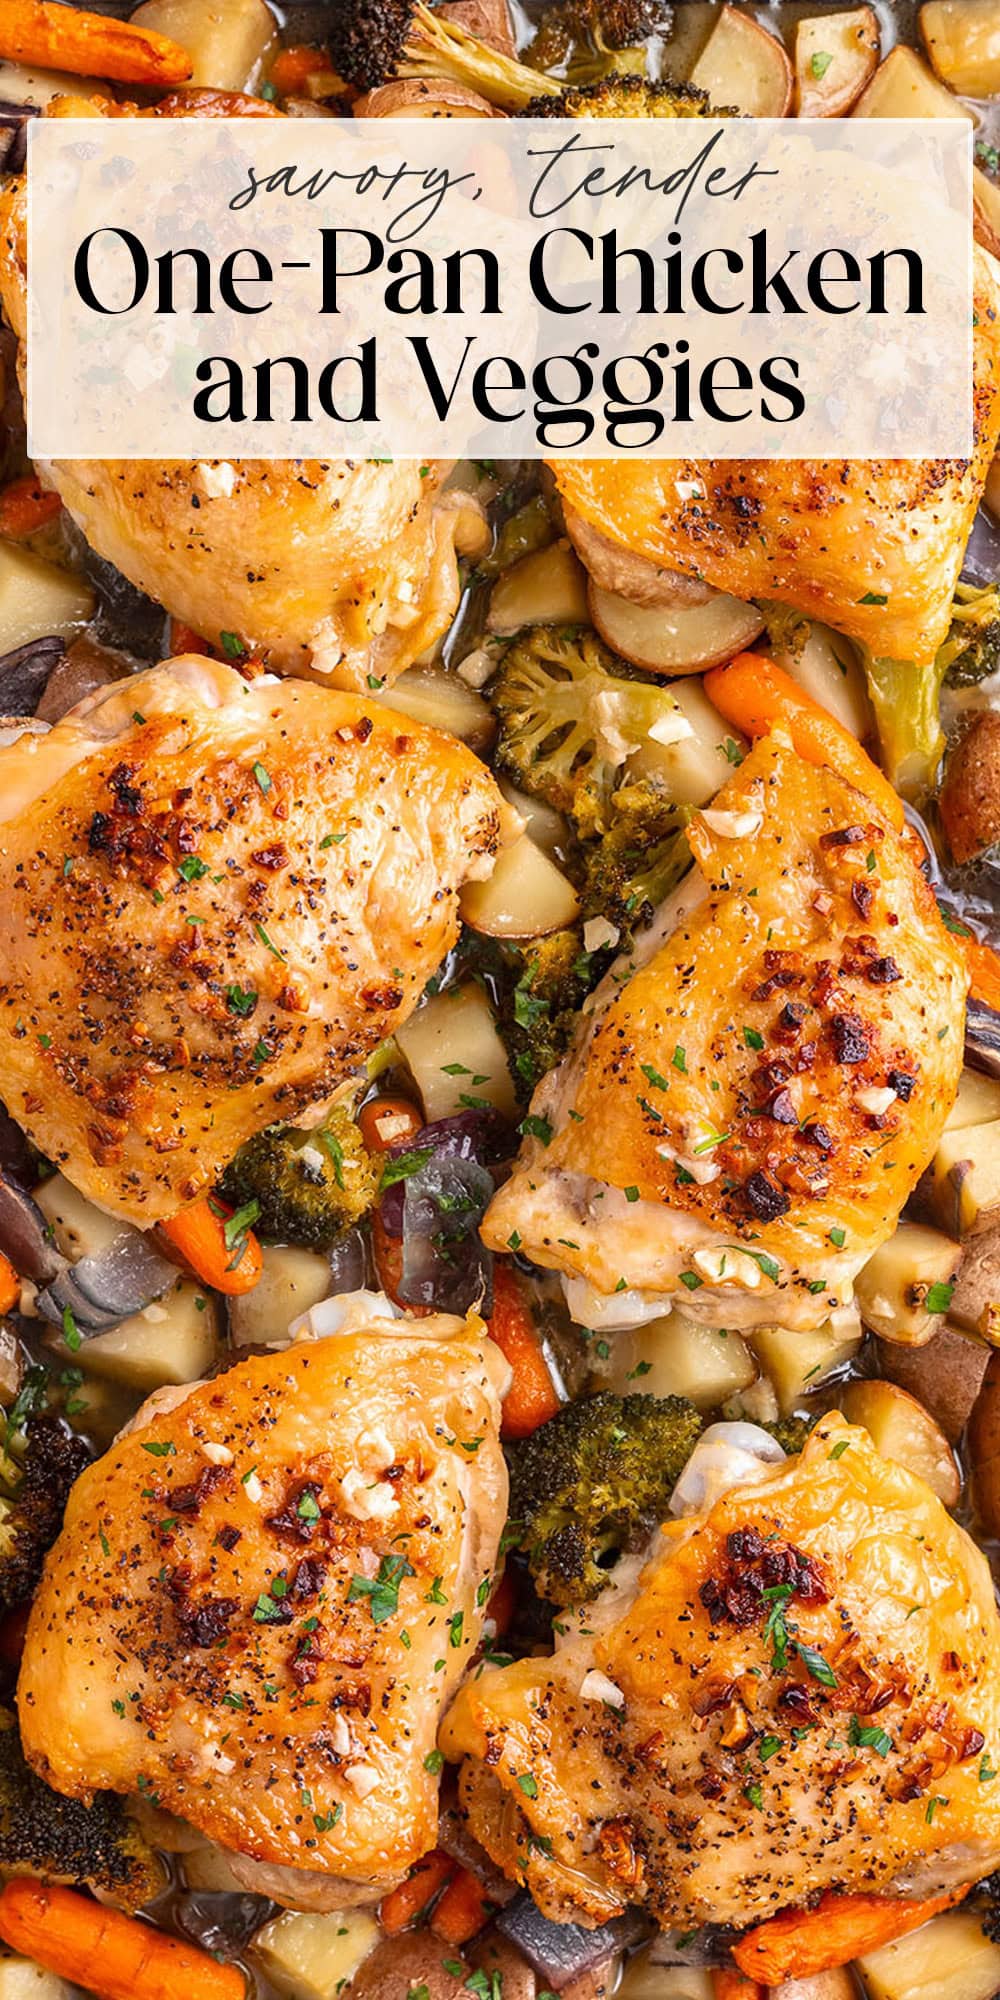 Pin graphic for one-pan chicken and veggies.